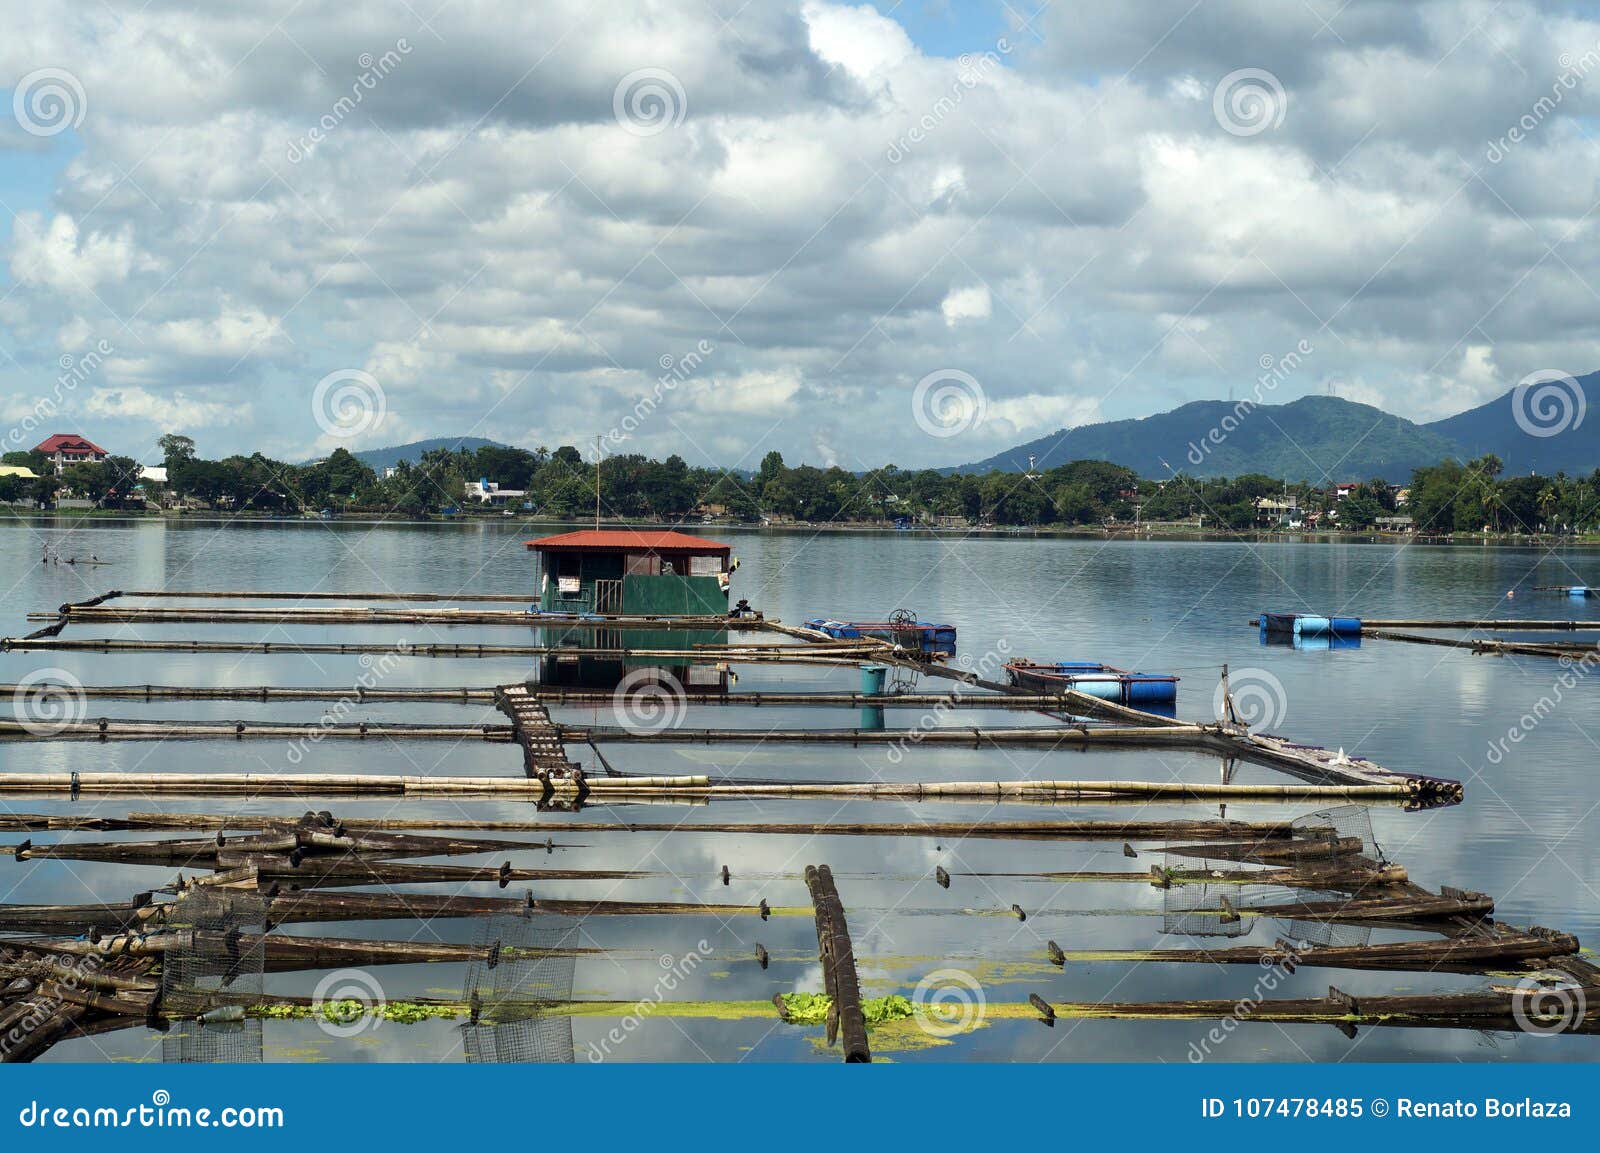 Bamboo Hut Built in the Middle of the Lake Stock Image - Image of  landscape, cage: 107478485